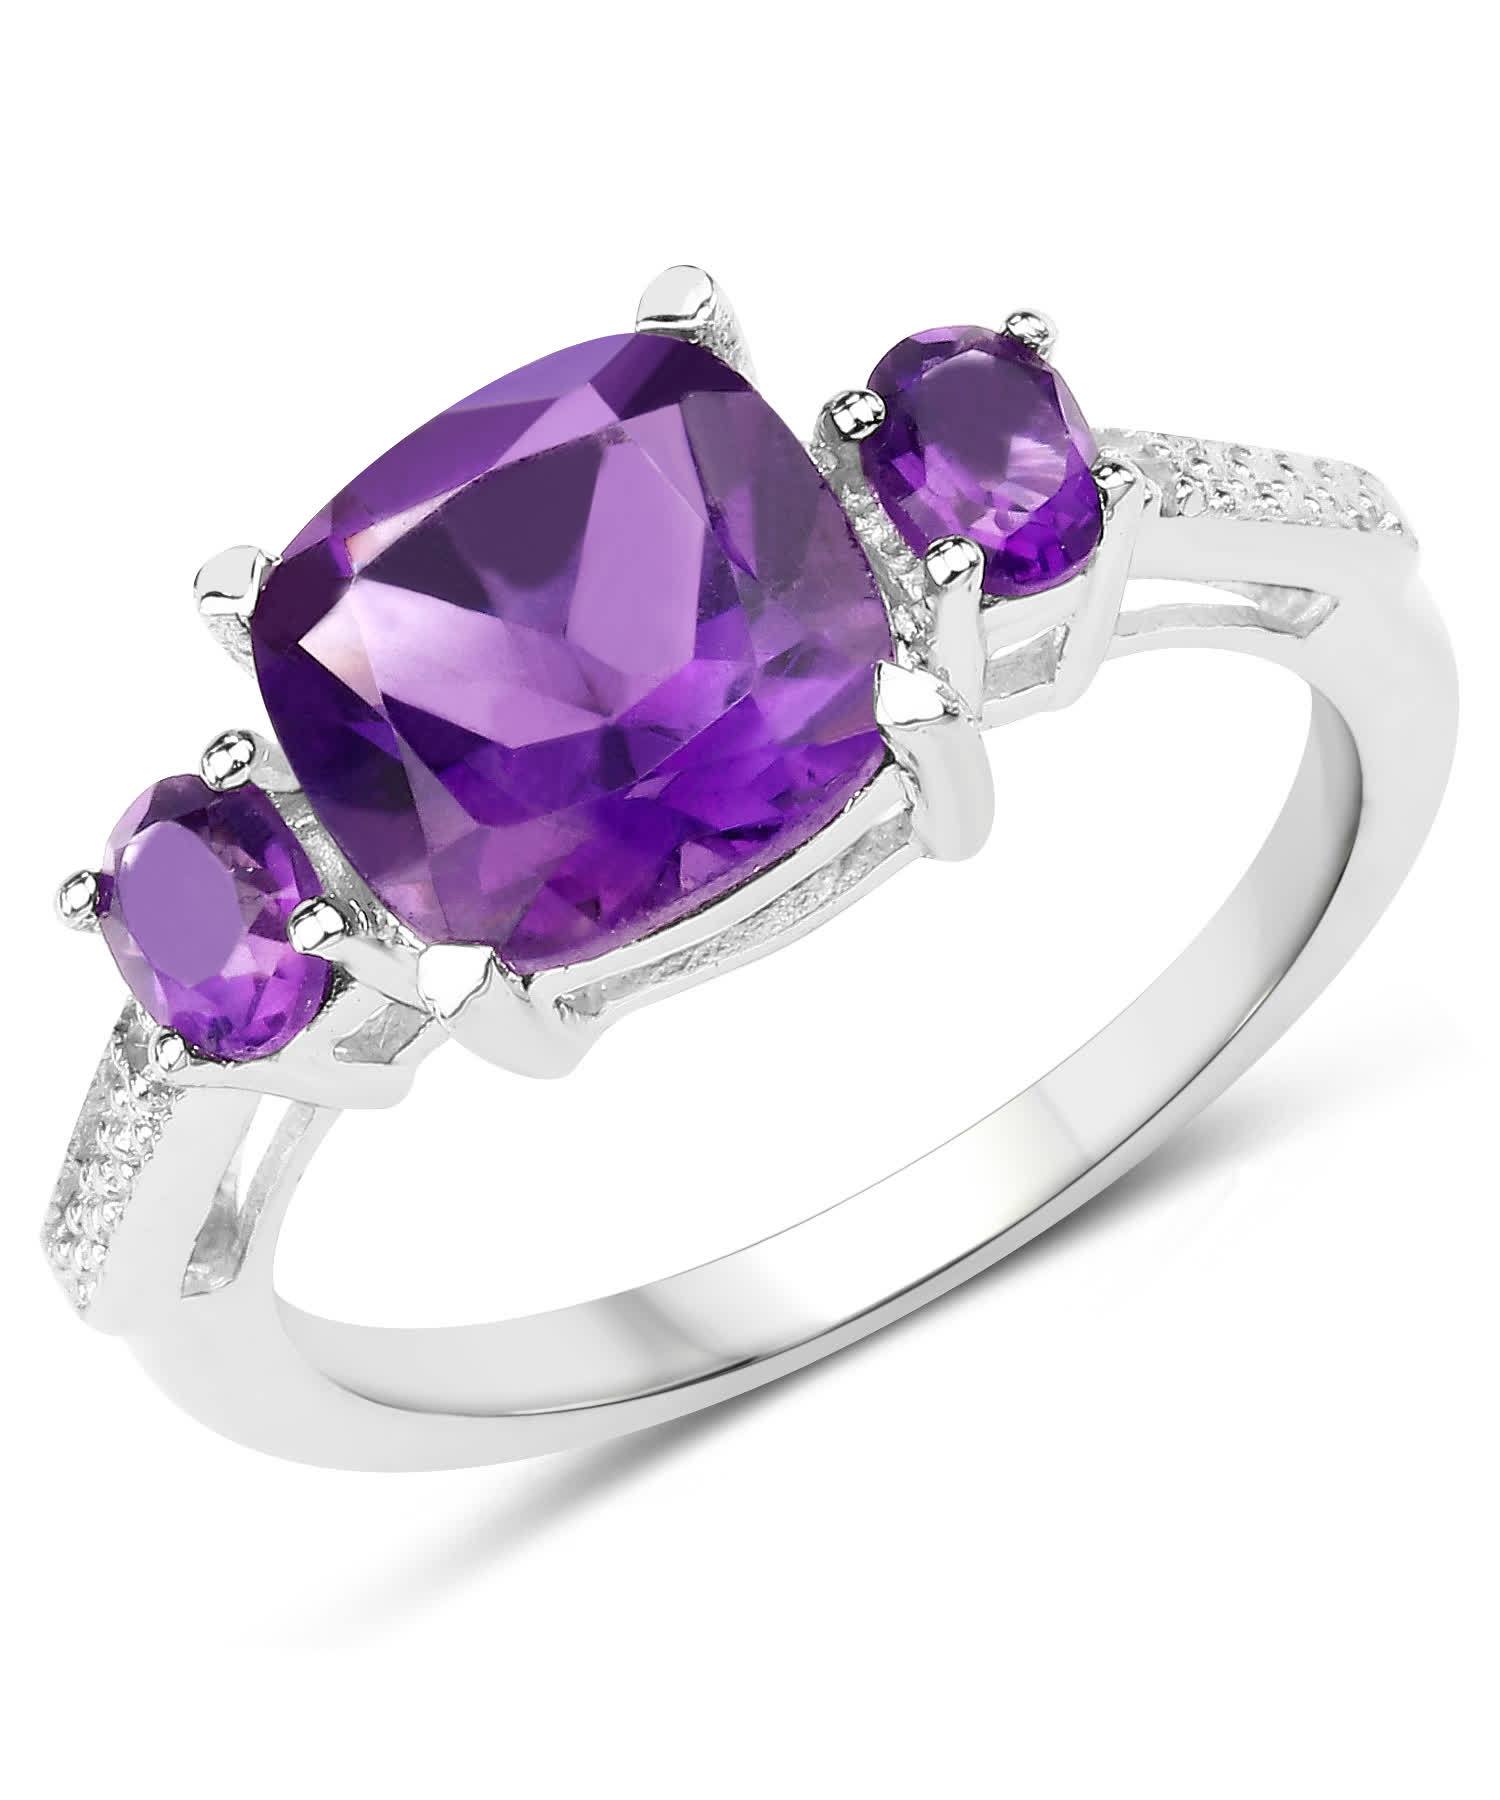 2.38ctw Natural Amethyst and Topaz Rhodium Plated 925 Sterling Silver Three-Stone Ring View 1